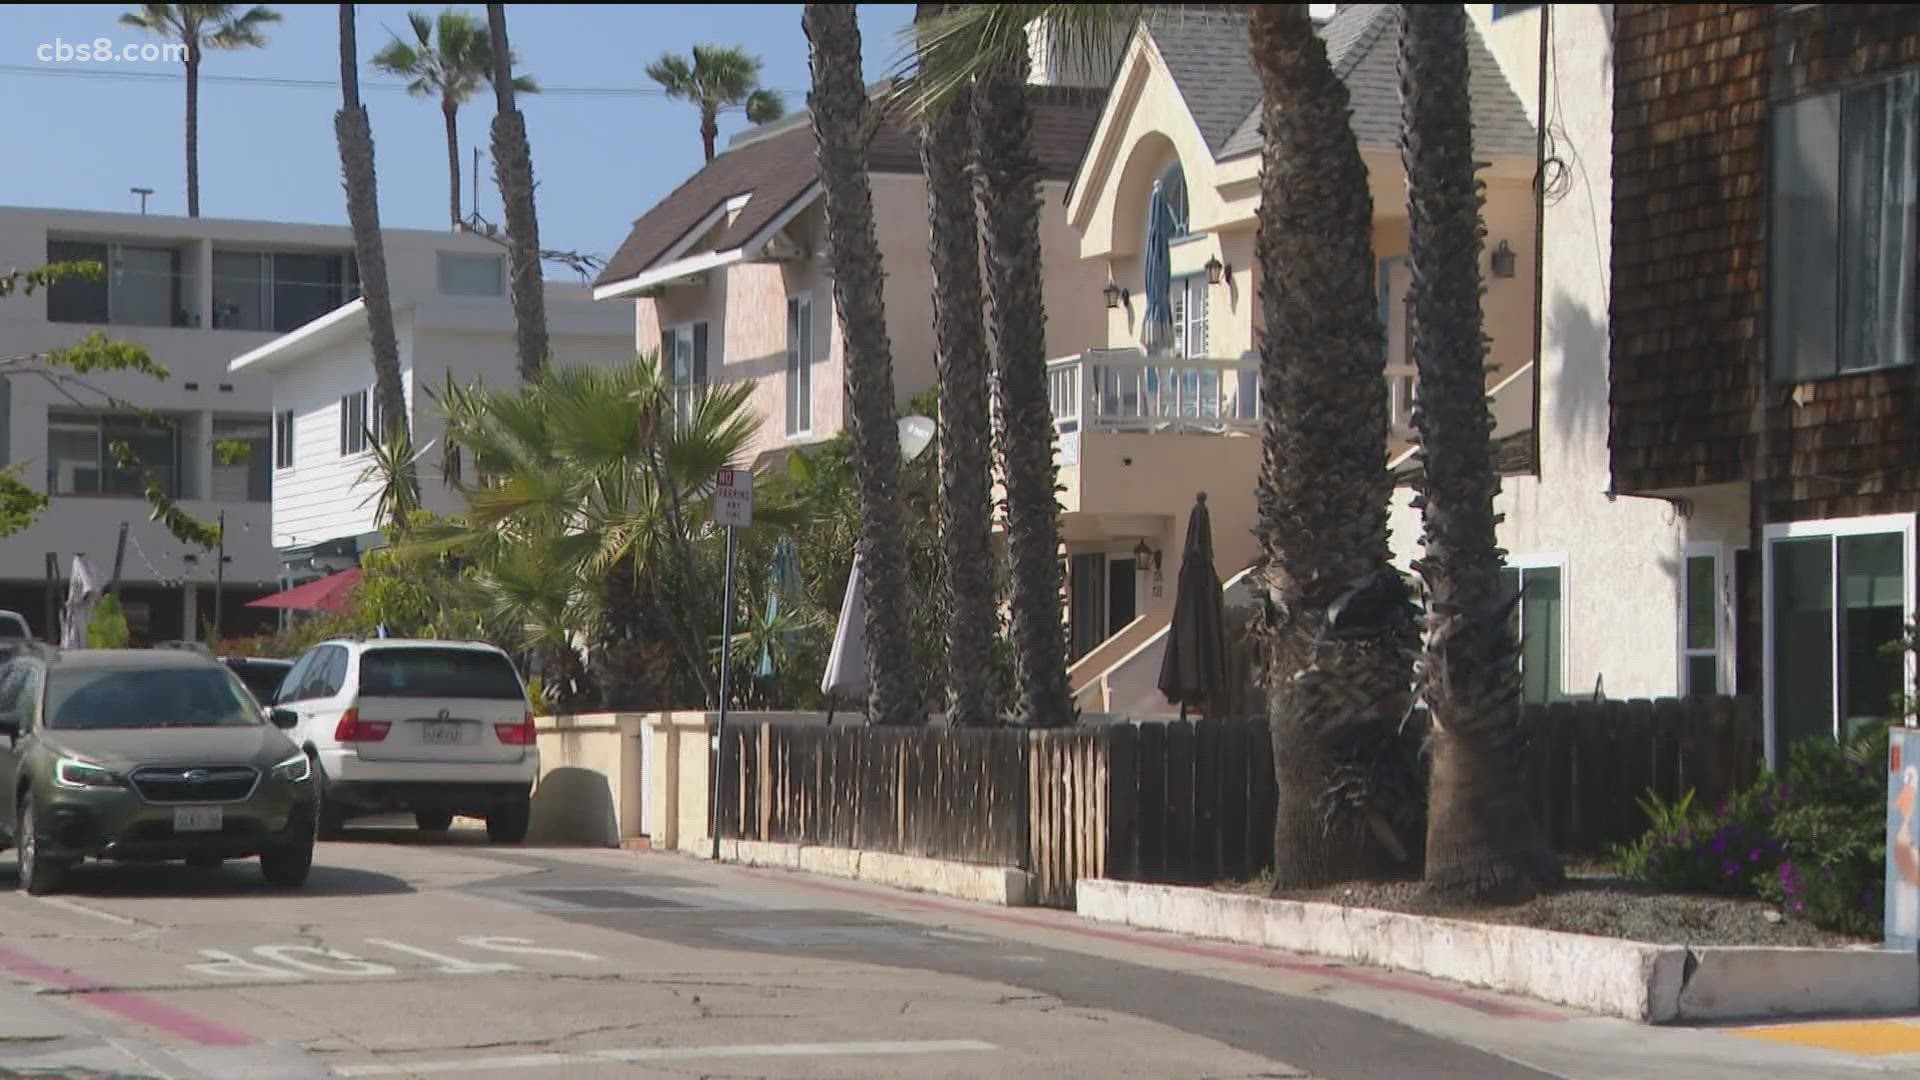 The long-running effort by the City of San Diego to regulate short-term rentals hit a milestone on Wednesday night.